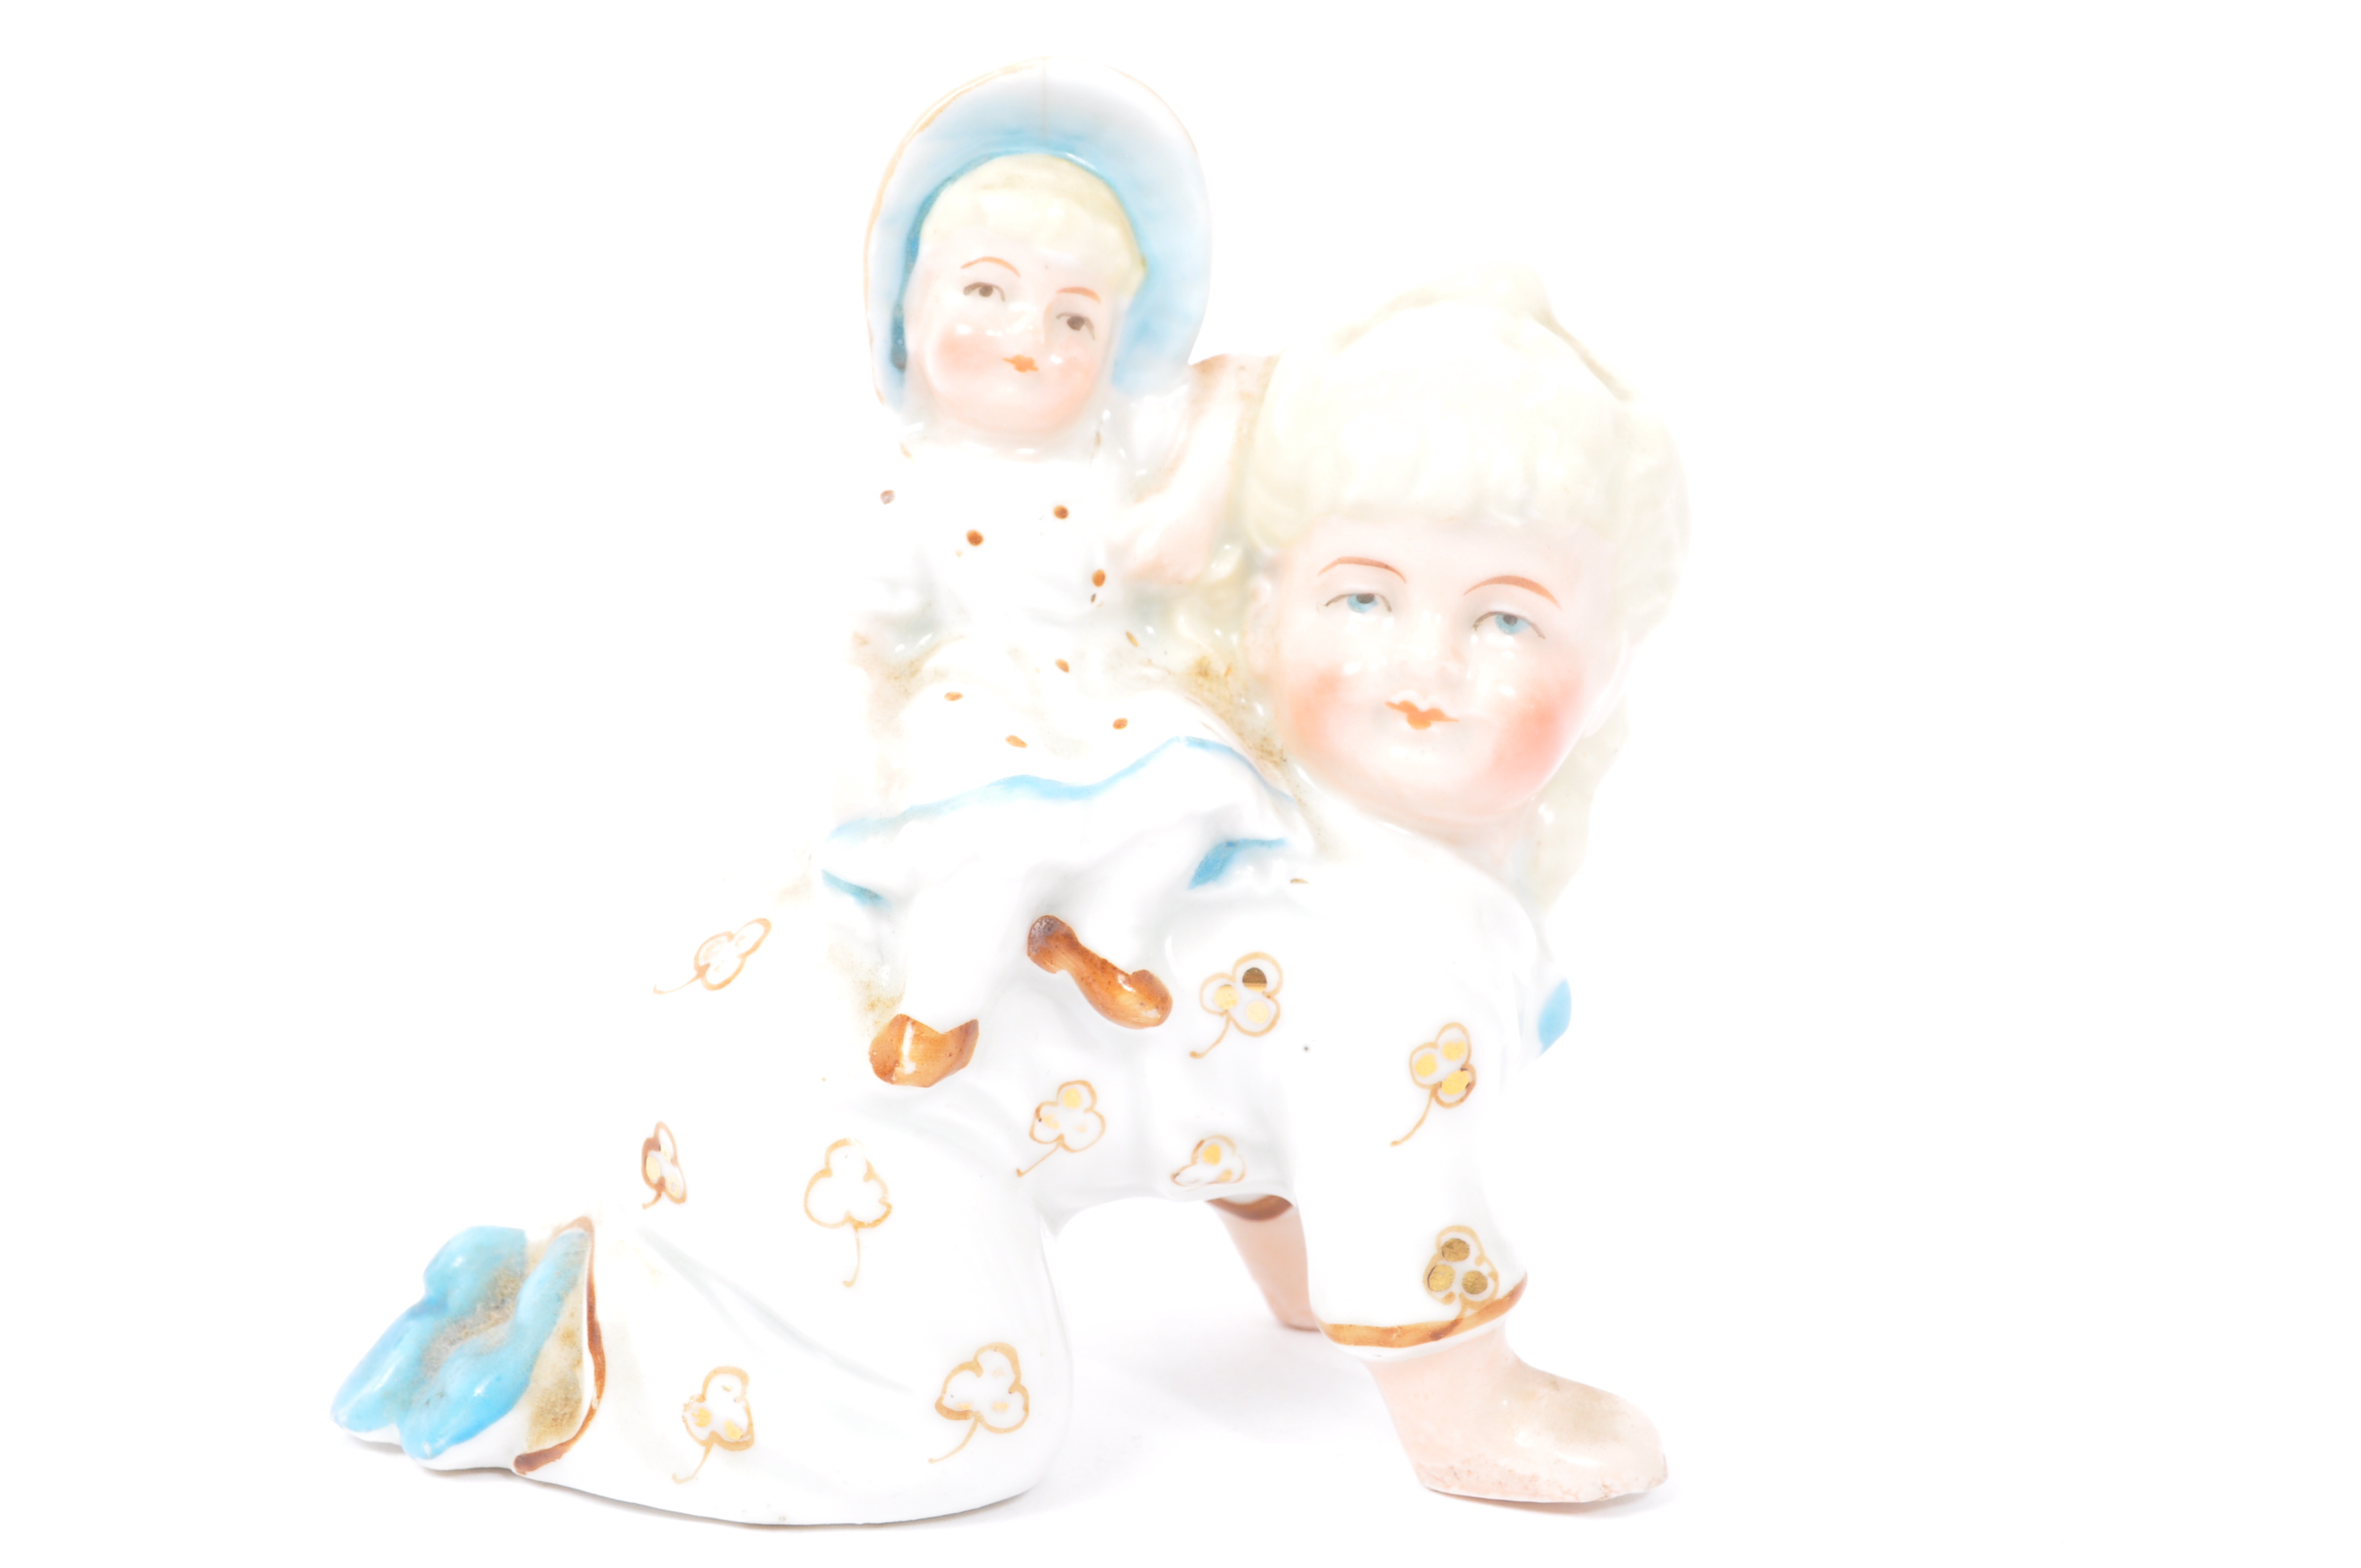 THREE EARLY 20TH CENTURY GERMAN HUEBACH BISQUE CHINA FIGURES - Image 5 of 5